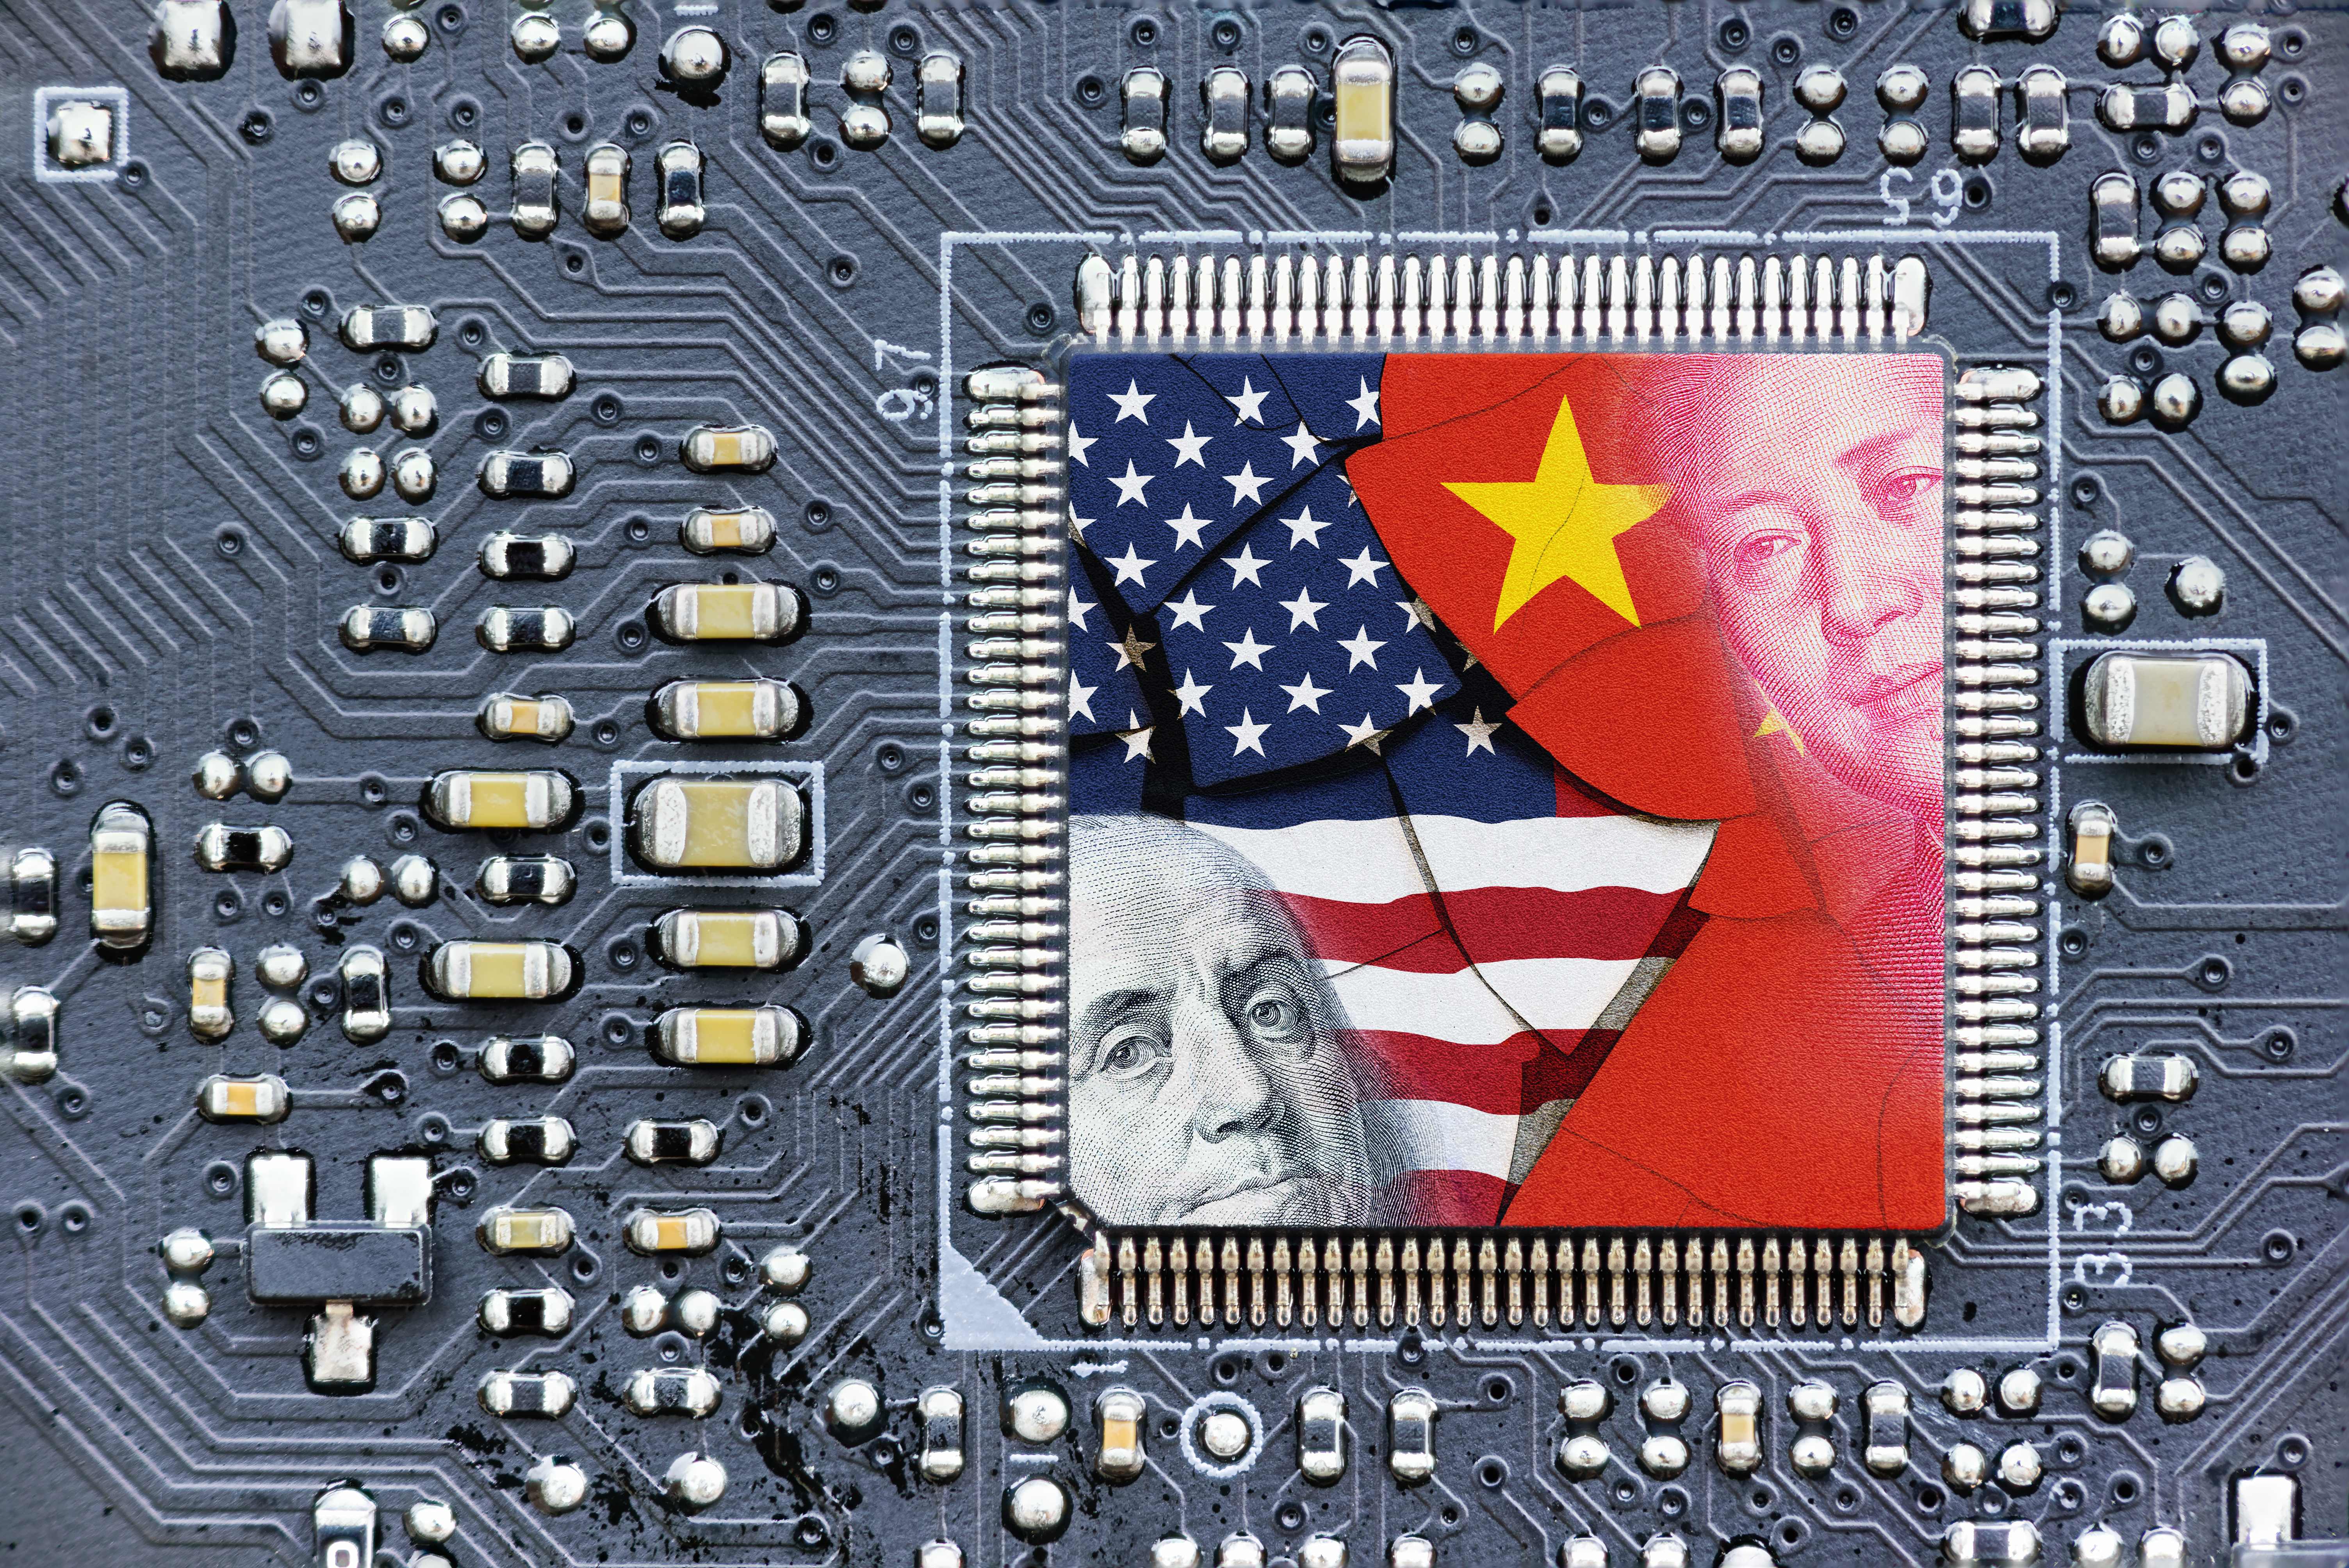 Flag of USA and China on a processor, CPU or GPU microchip on a motherboard.